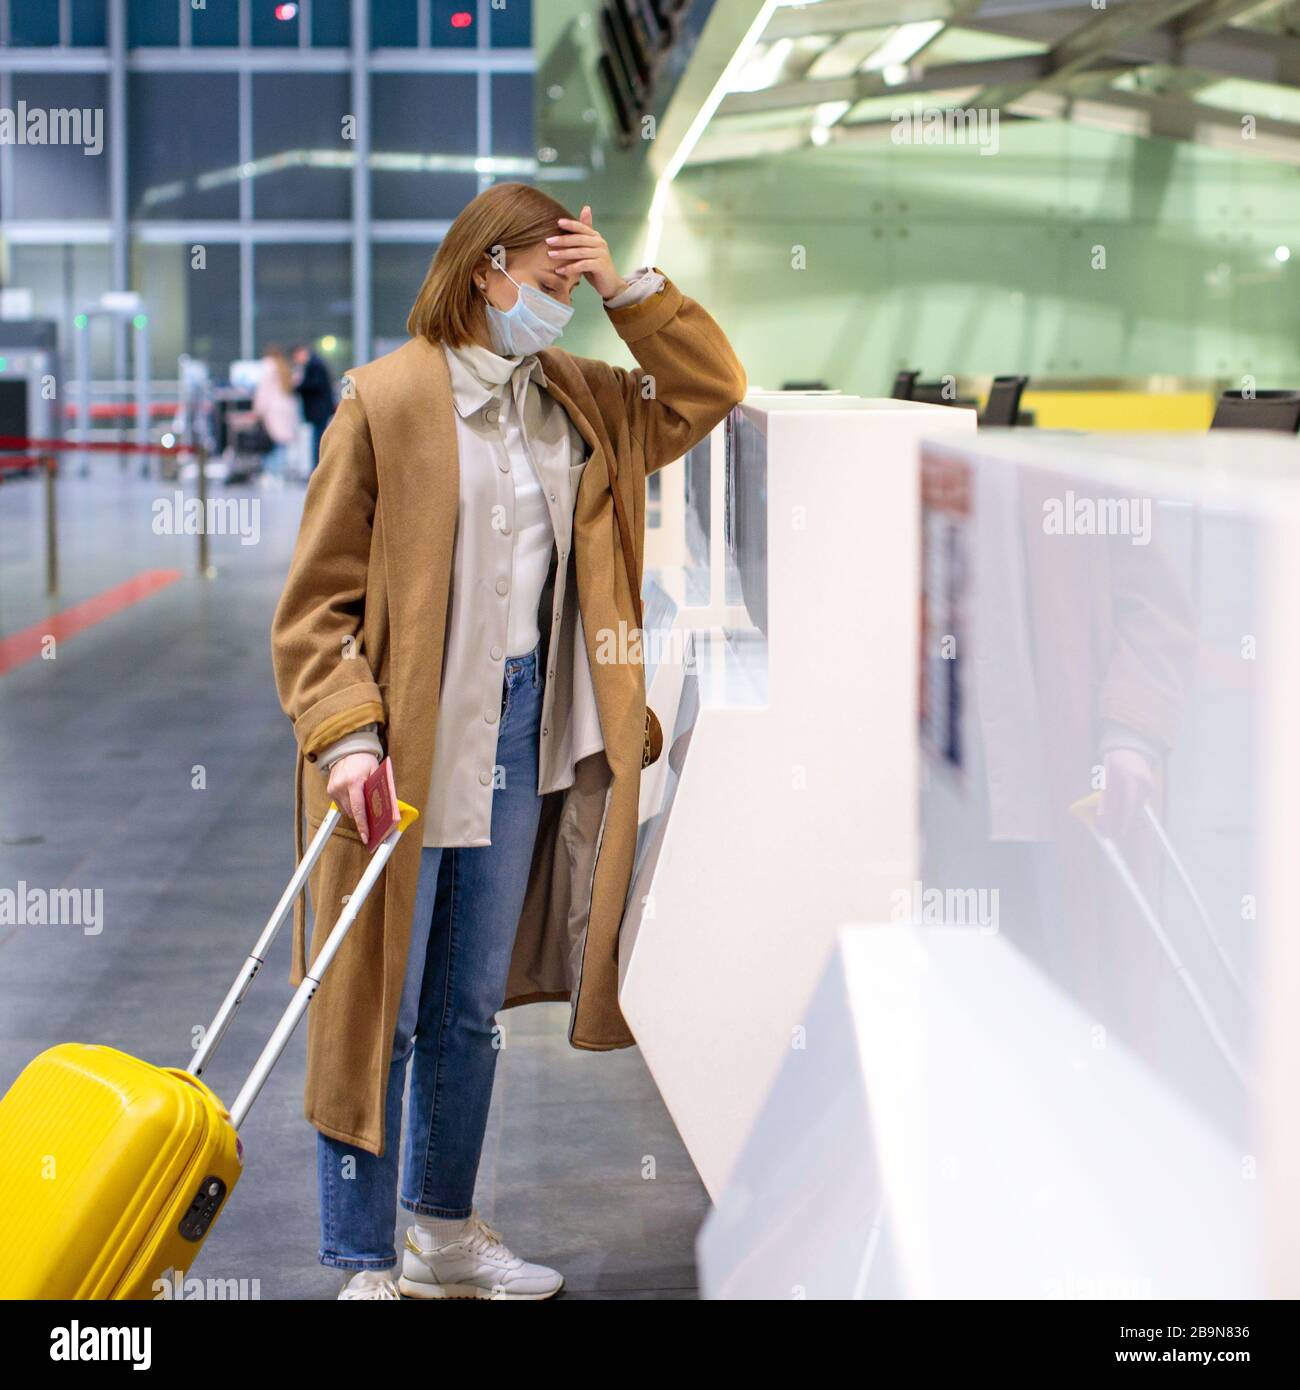 Woman with luggage upset over flight cancellation, stands at empty check-in counters at the airport terminal due to coronavirus pandemic/Covid-19 outb Stock Photo